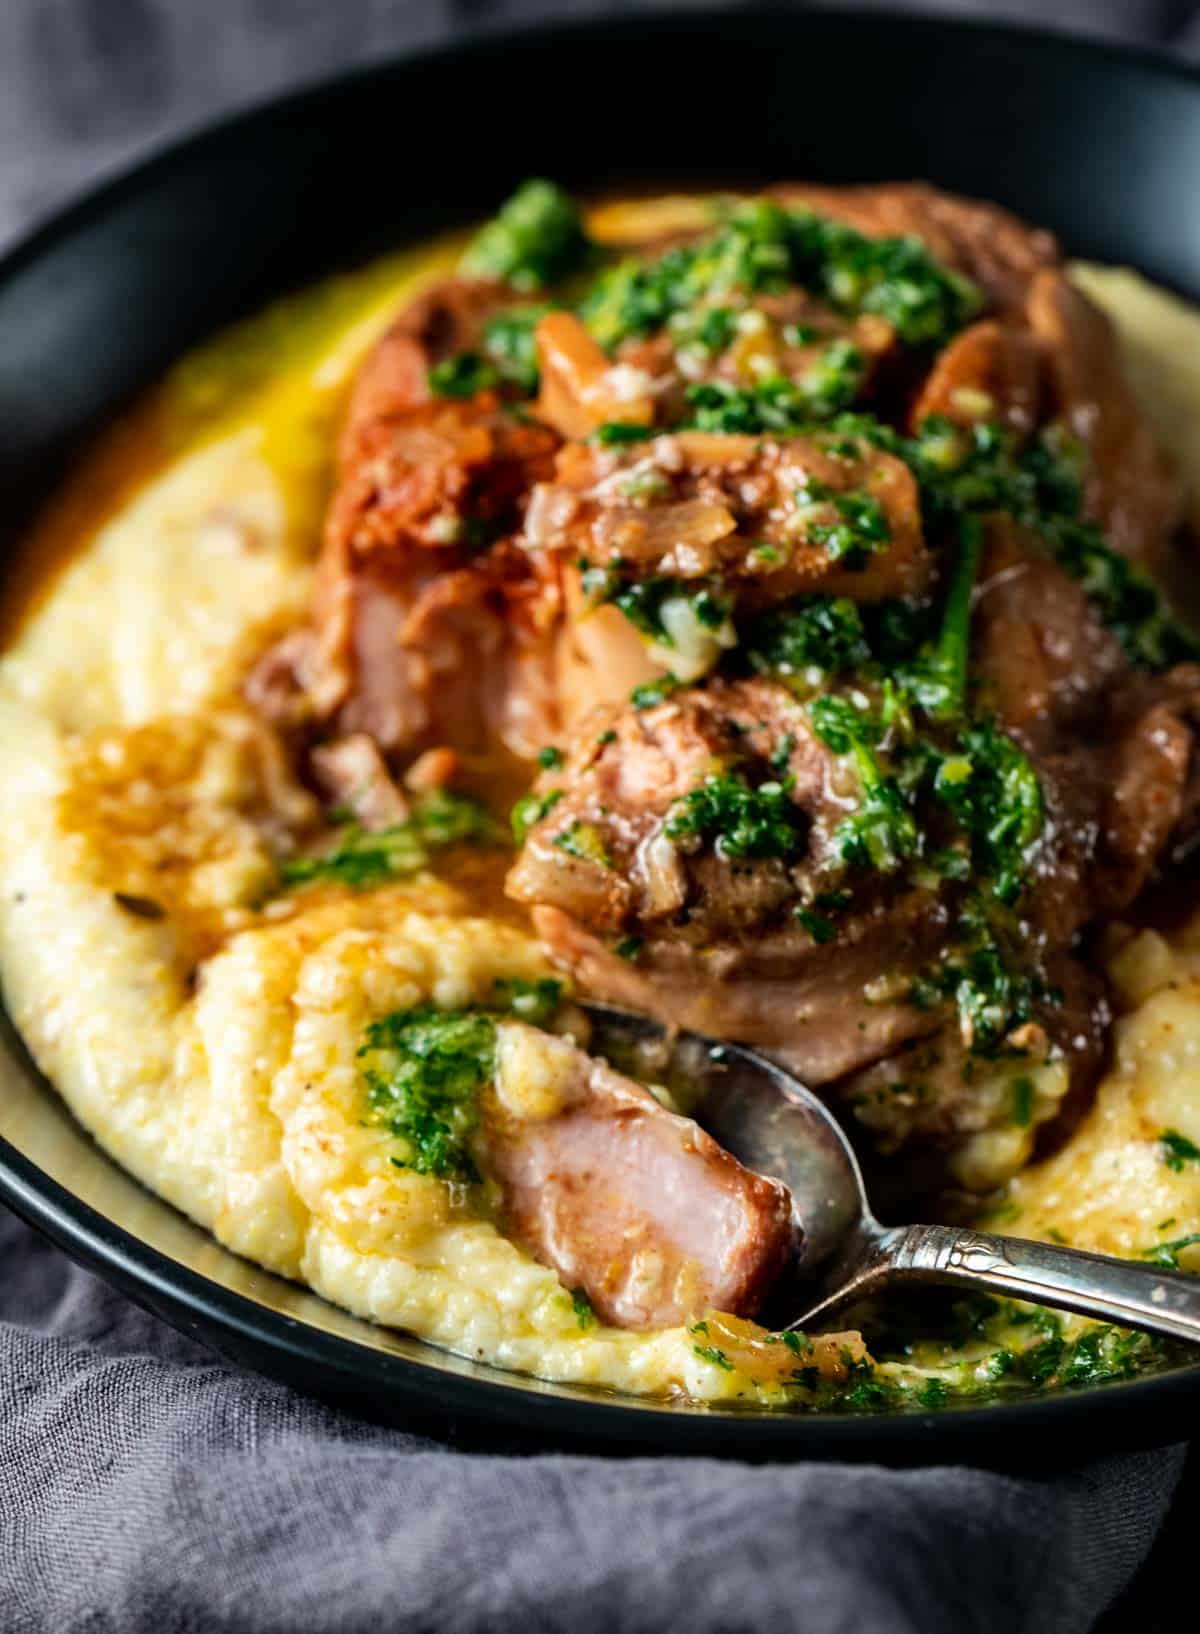 Side view of a spoonful of osso buco and polenta being taken from a bowl.